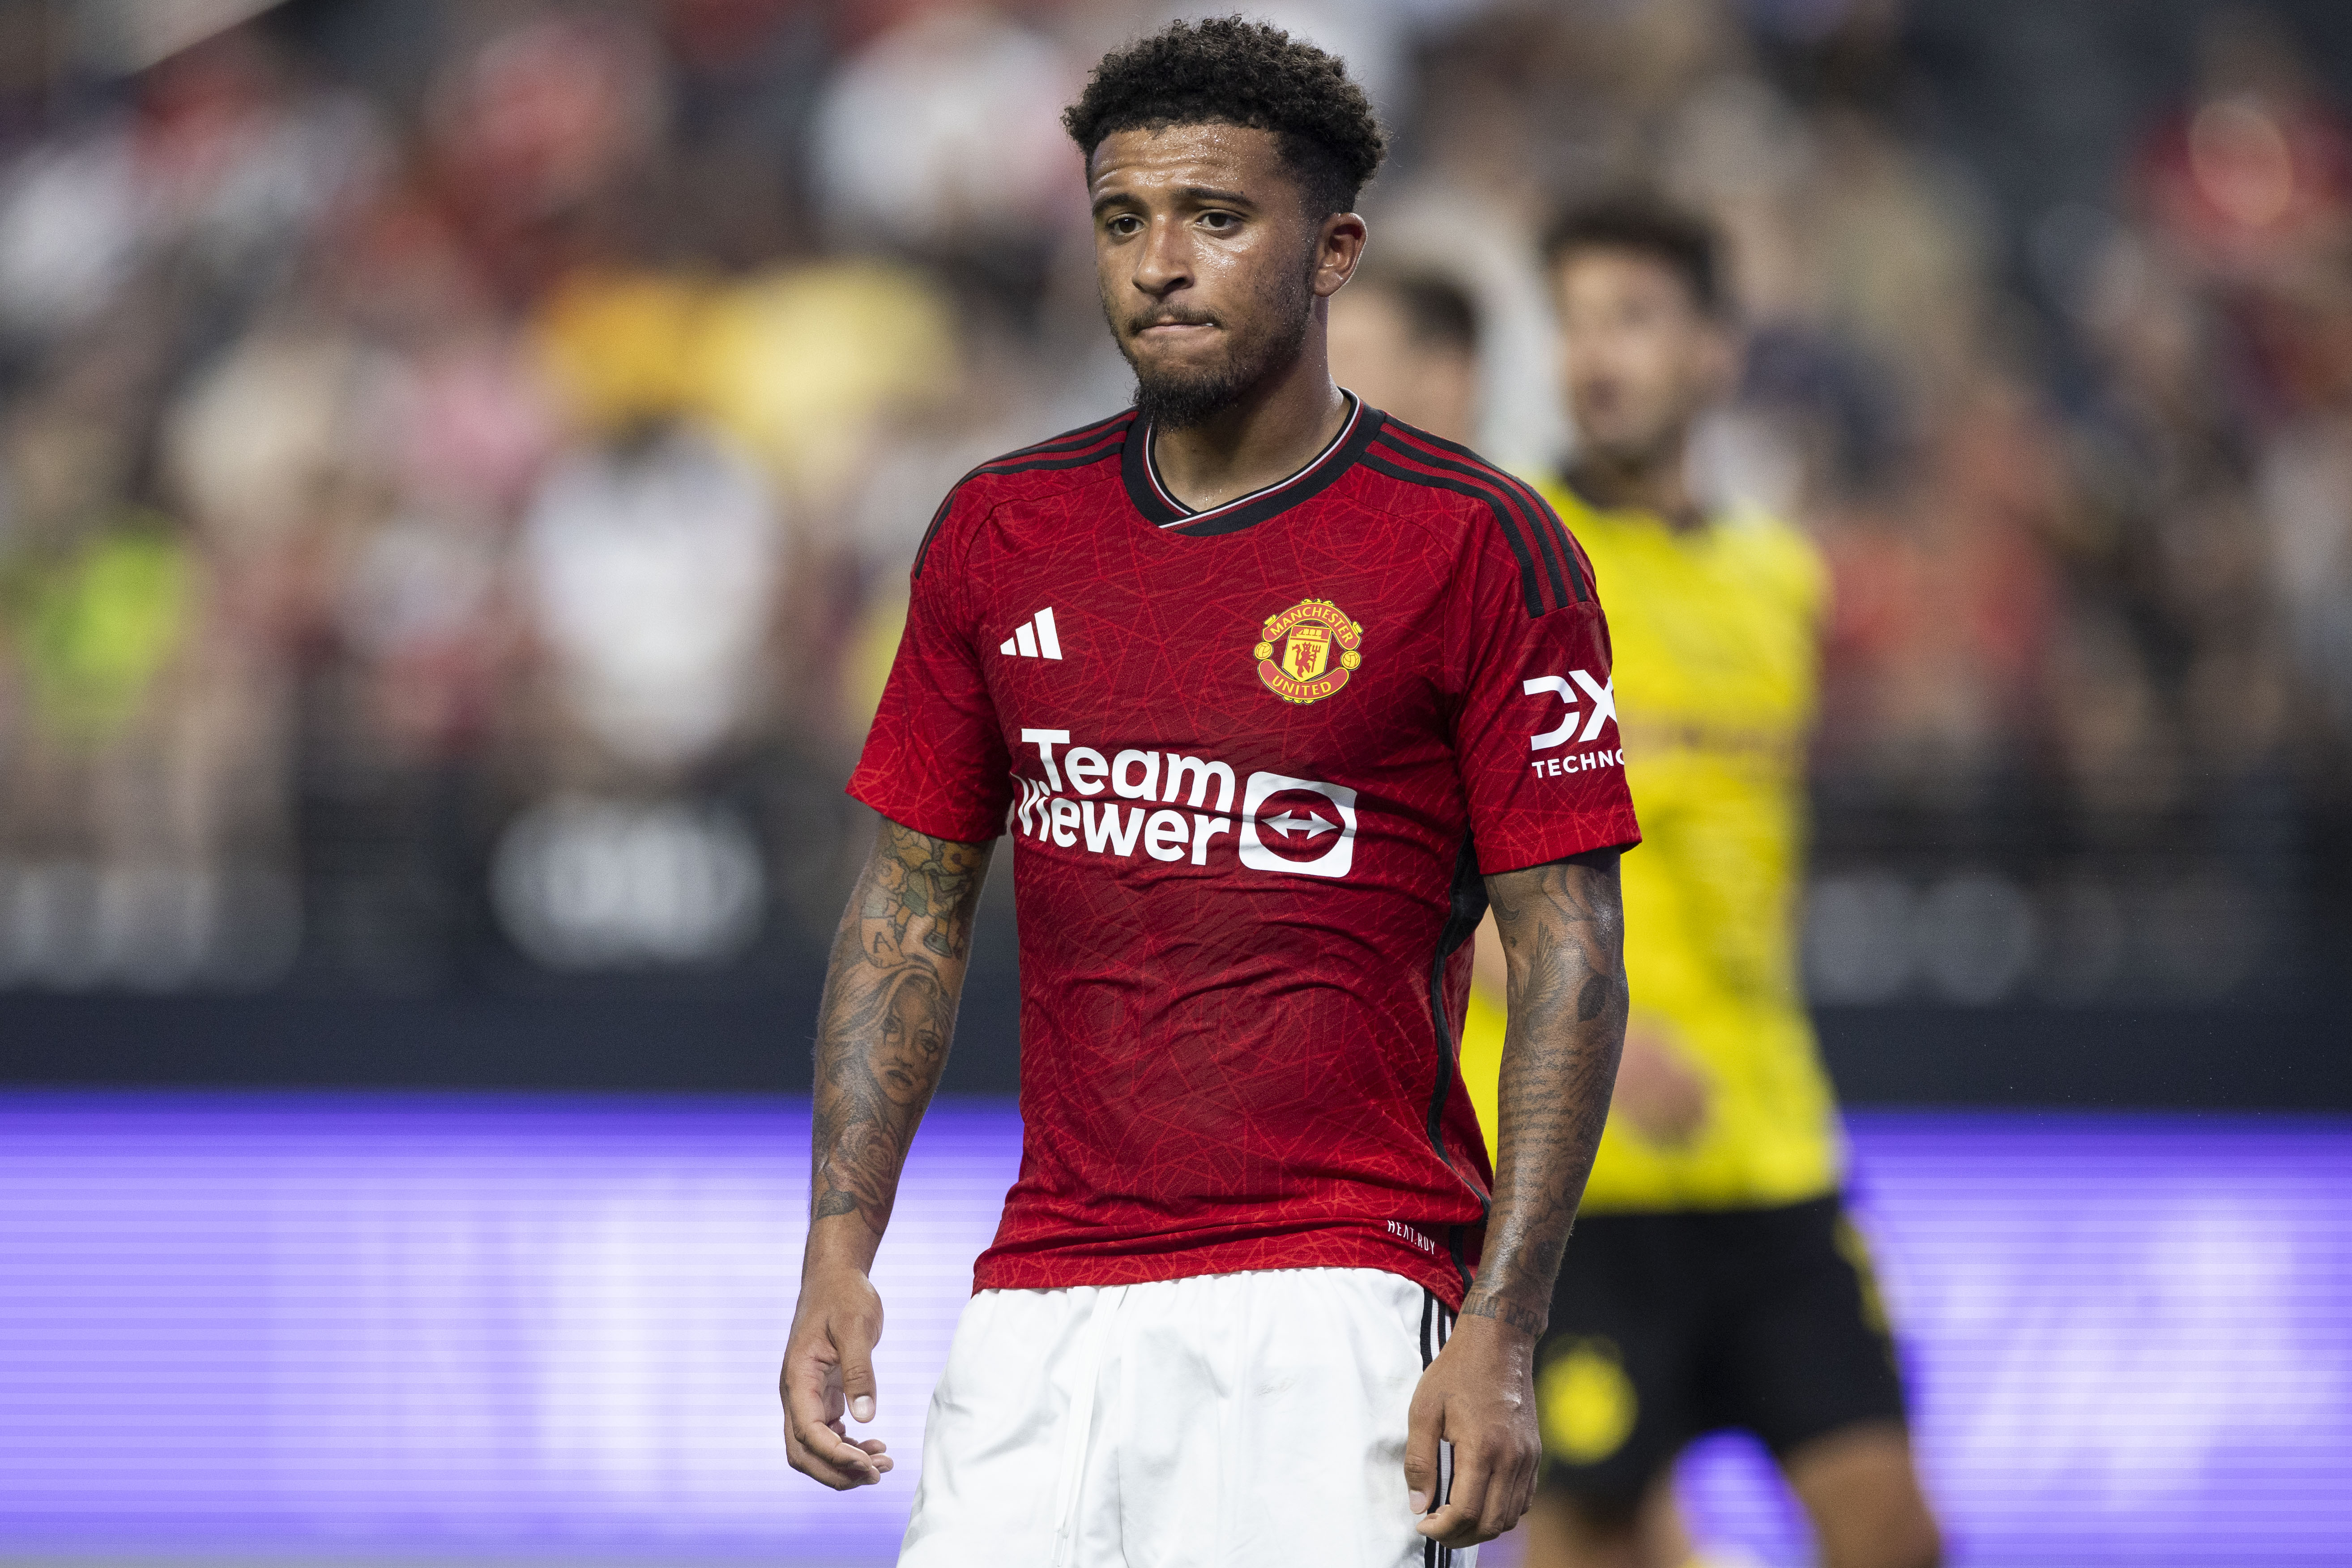 Man Utd attacker Sancho has been exiled after criticising manager Ten Hag with a now deleted social media post